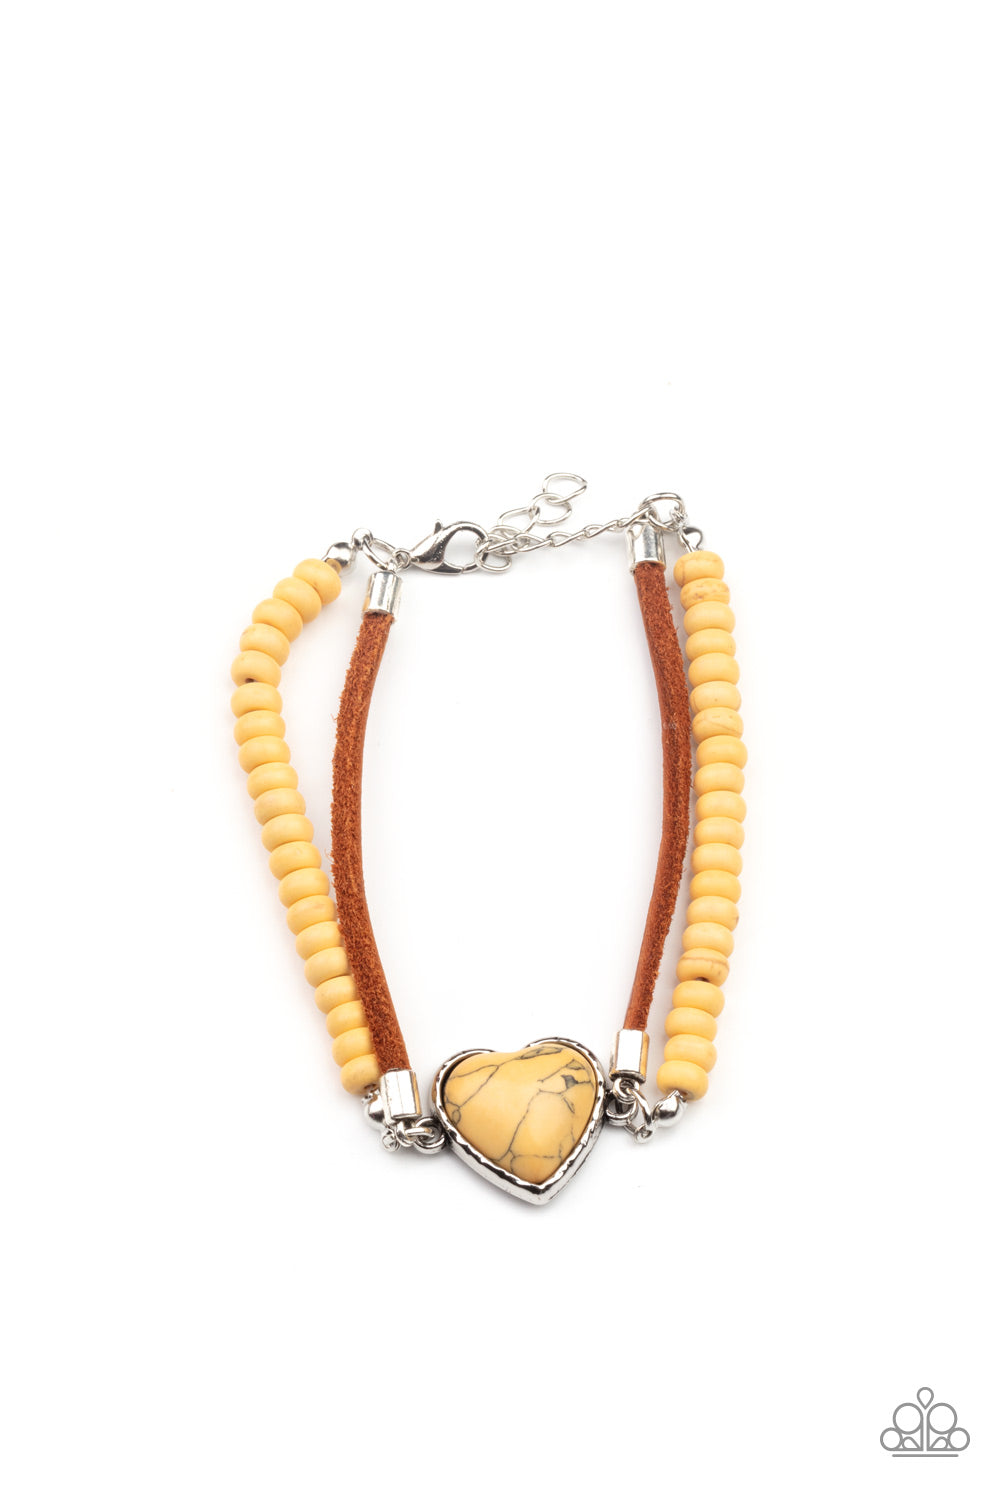 Charmingly Country Yellow Bracelet